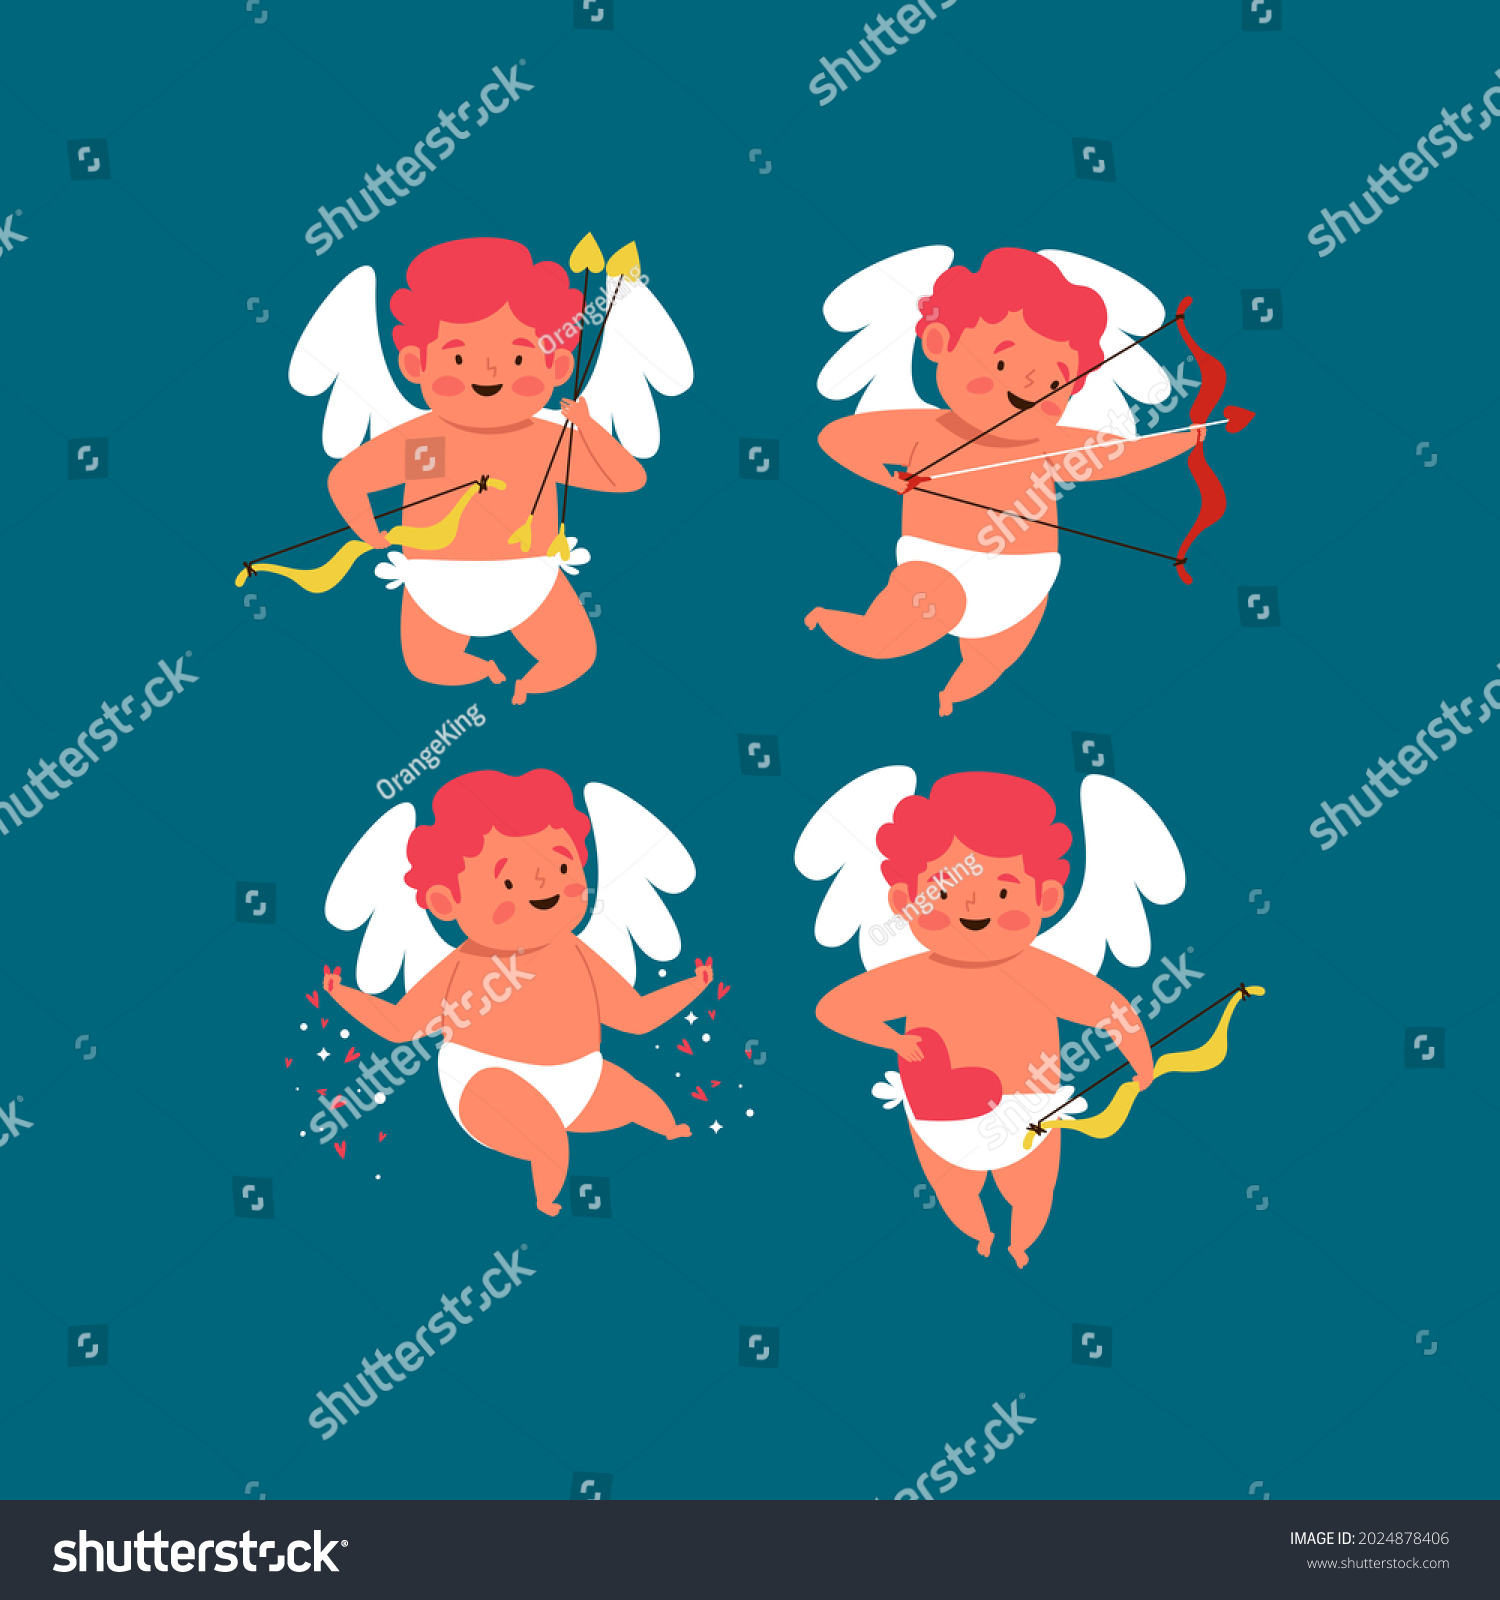 Cartoon Cupid Character Collection Angel Heart Stock Vector Royalty Free 2024878406 Shutterstock 8027